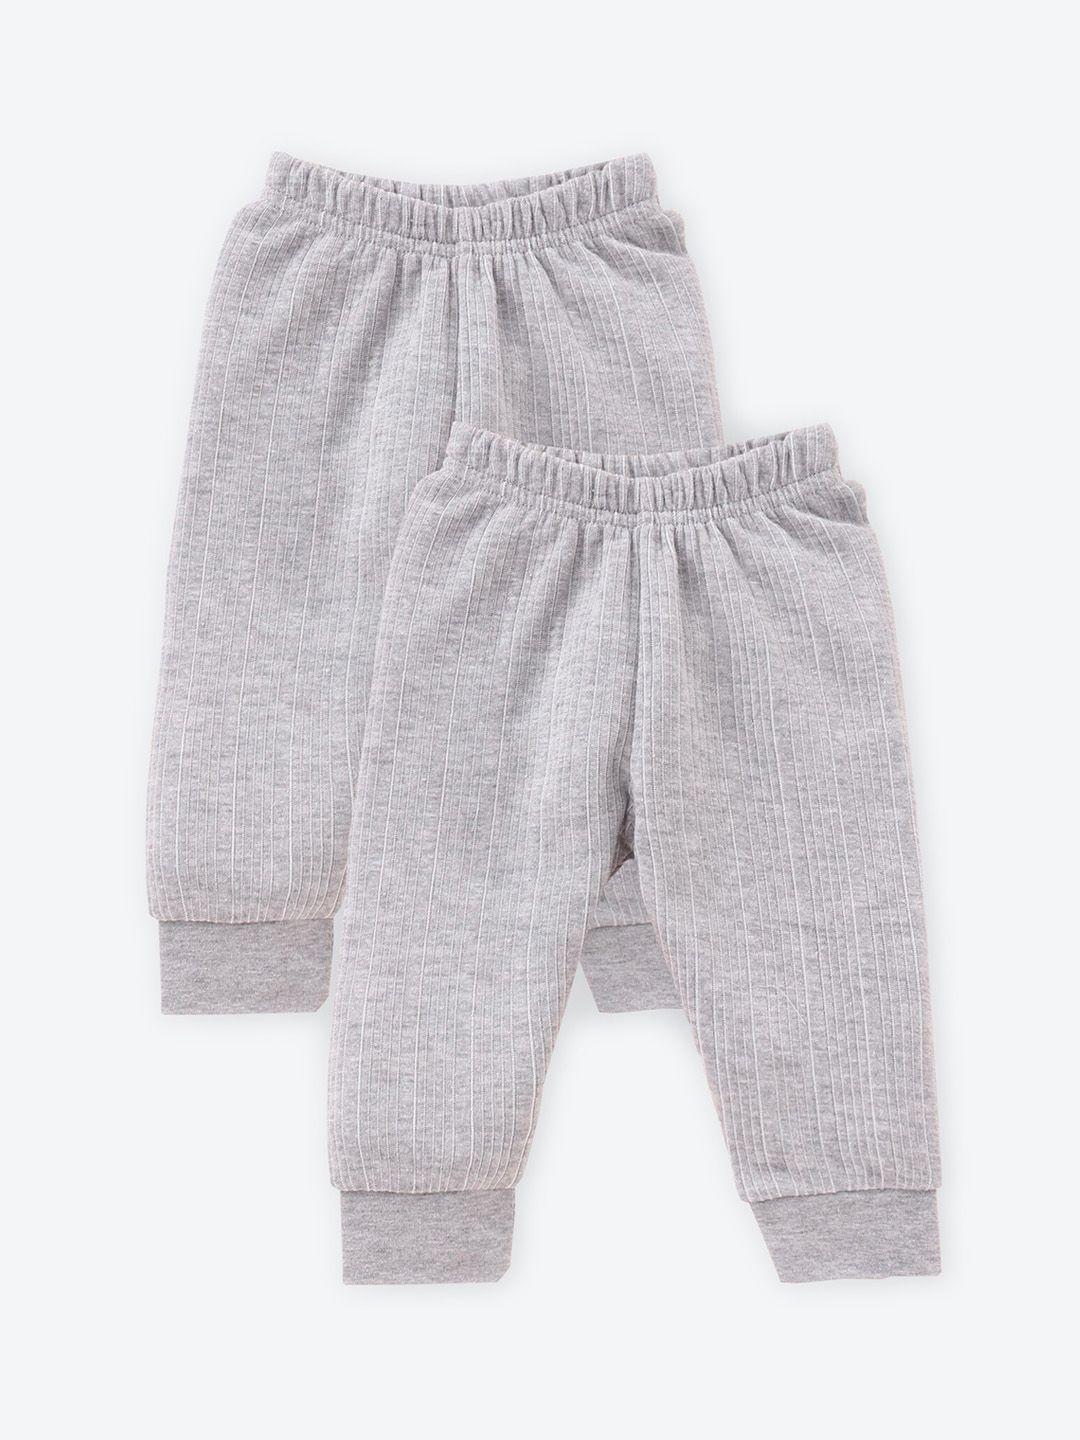 aerowarm kids pack of 2 grey solid cotton thermal bottoms